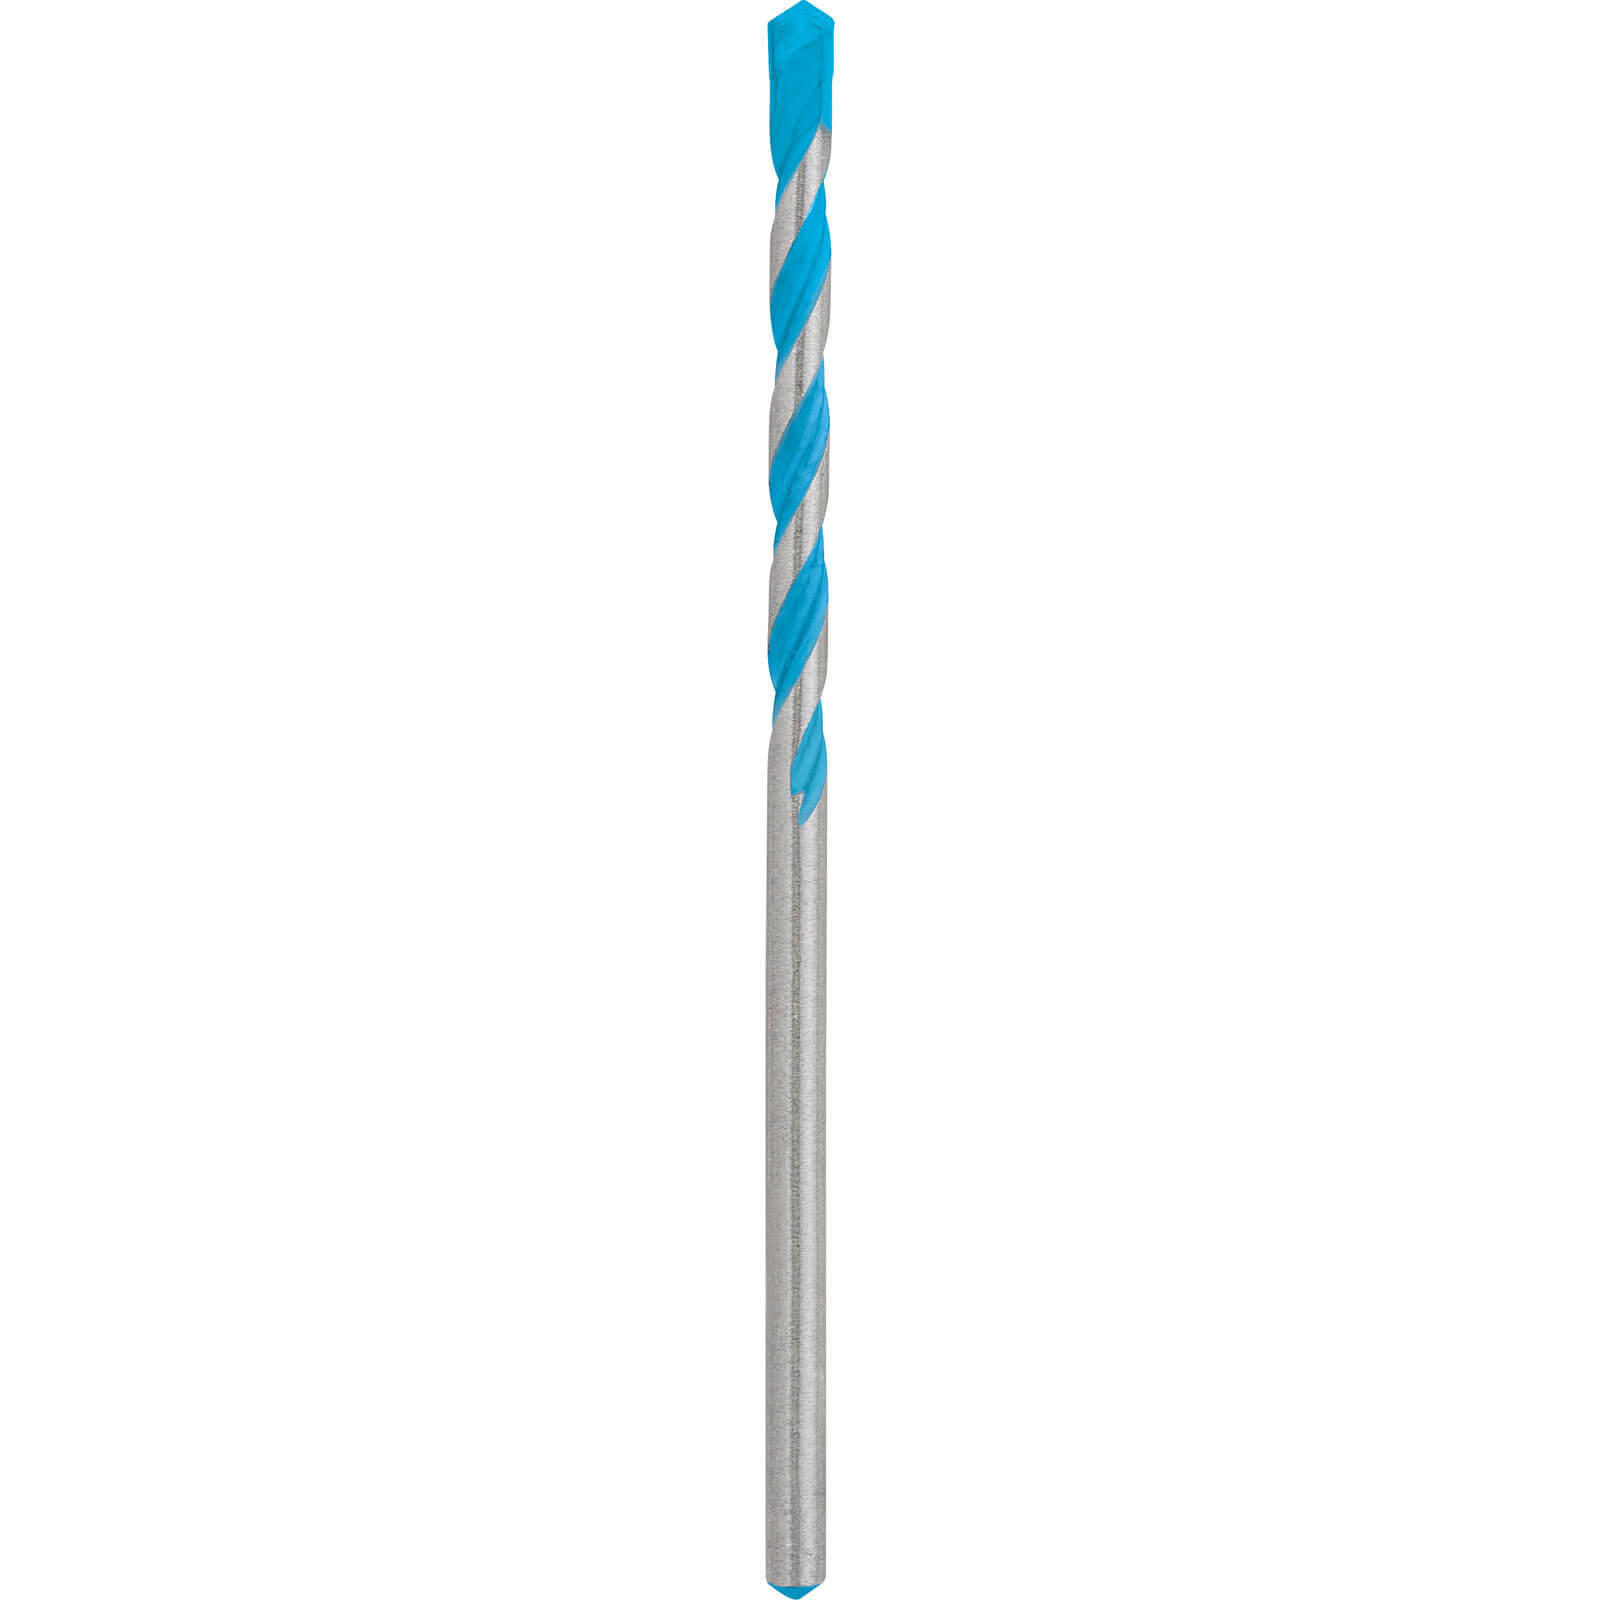 Photo of Bosch Expert Cyl-9 Multi Construction Drill Bit 10mm 250mm Pack Of 1